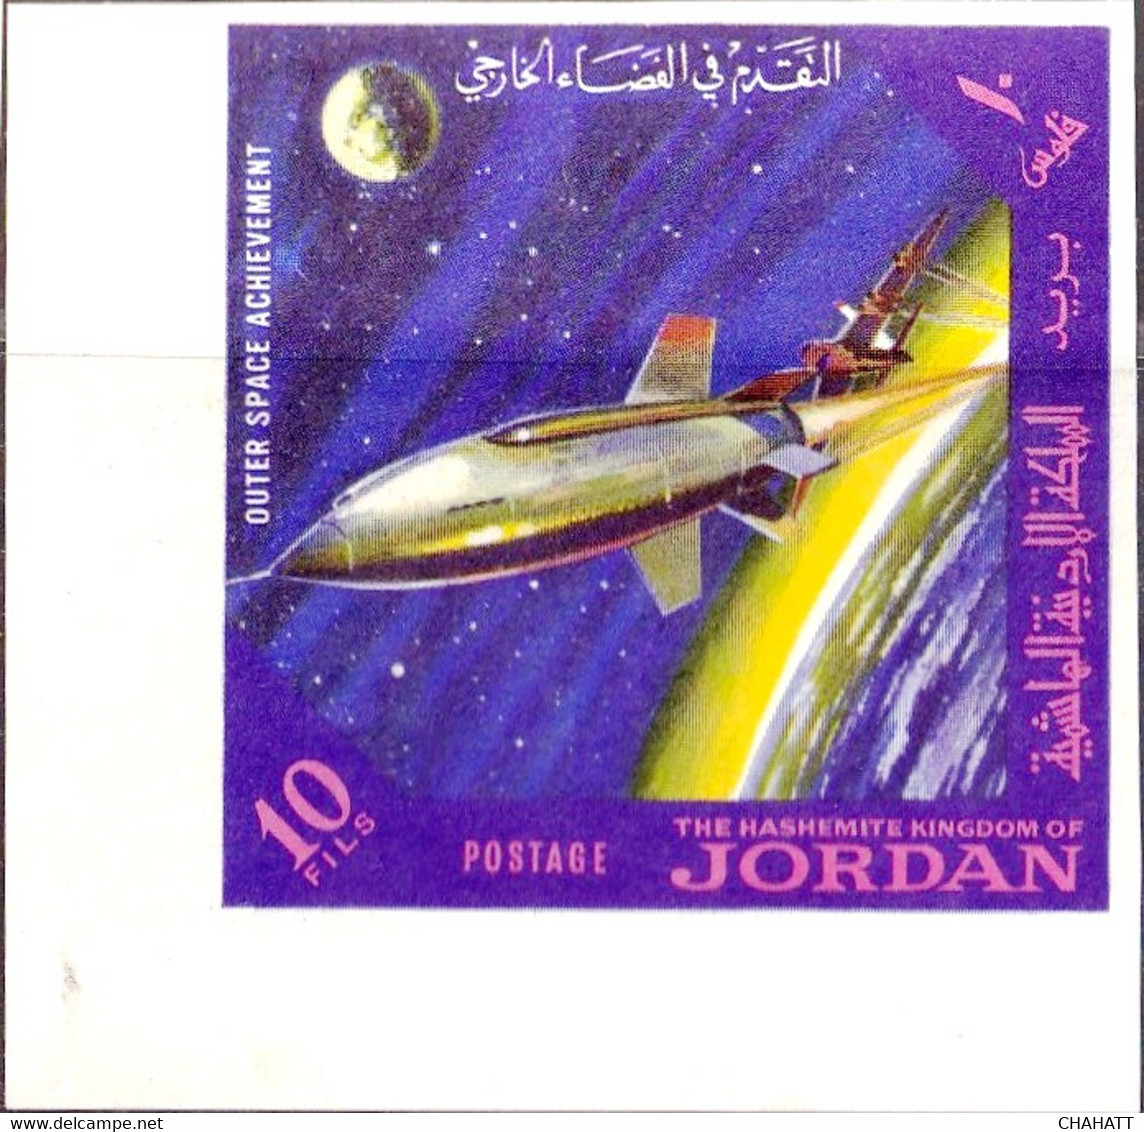 SPACE- OUTER SPACE ACHIEVEMENTS- SET OF 5 IMPERF - JORDAN - SCARCE- MNH- H2-04 - Collections